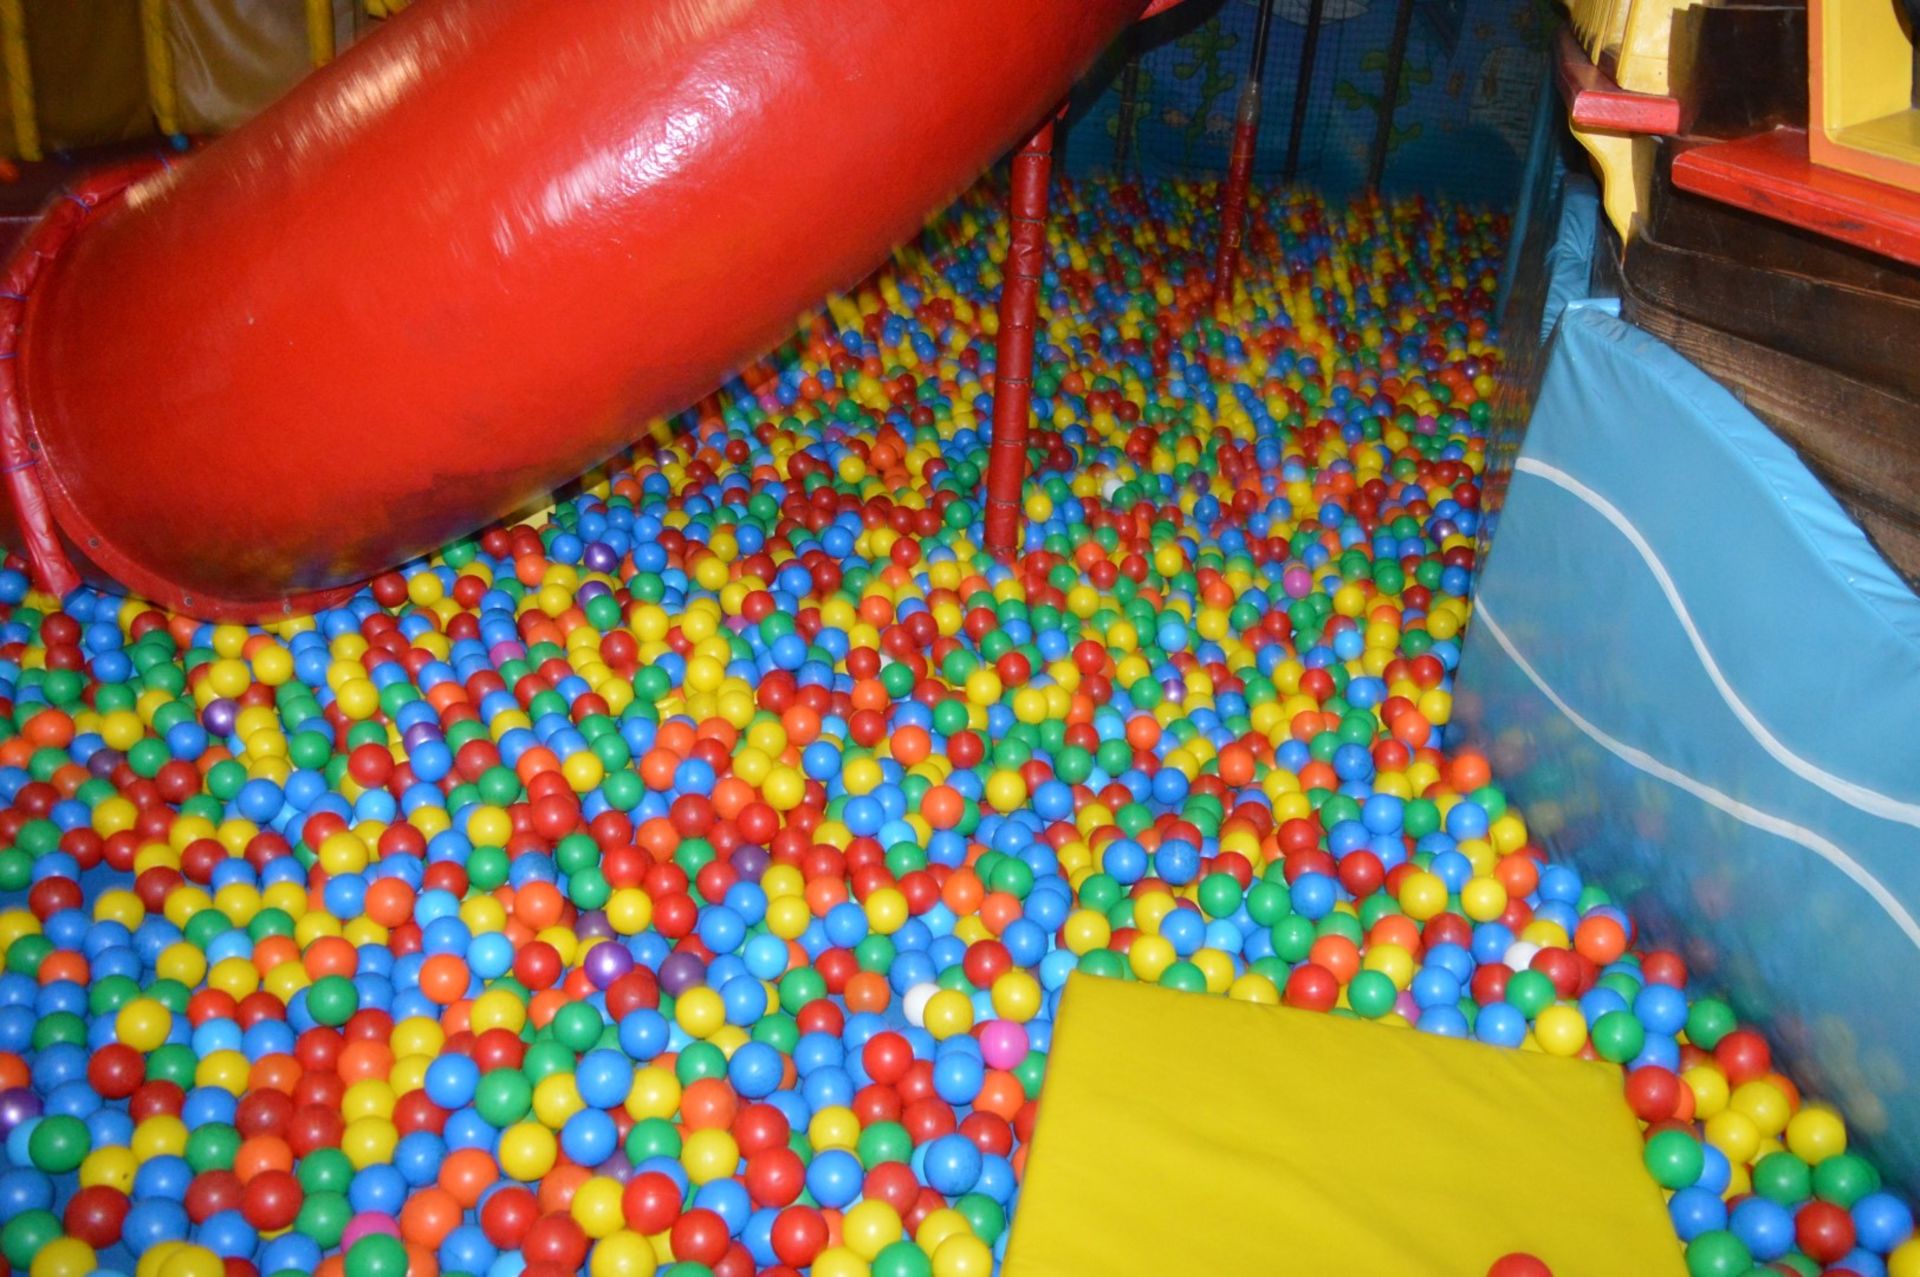 1 x Huge Amount of Childrens Play Balls From Childrens Playcentre in Good Condition - Ref PTP - - Image 4 of 7